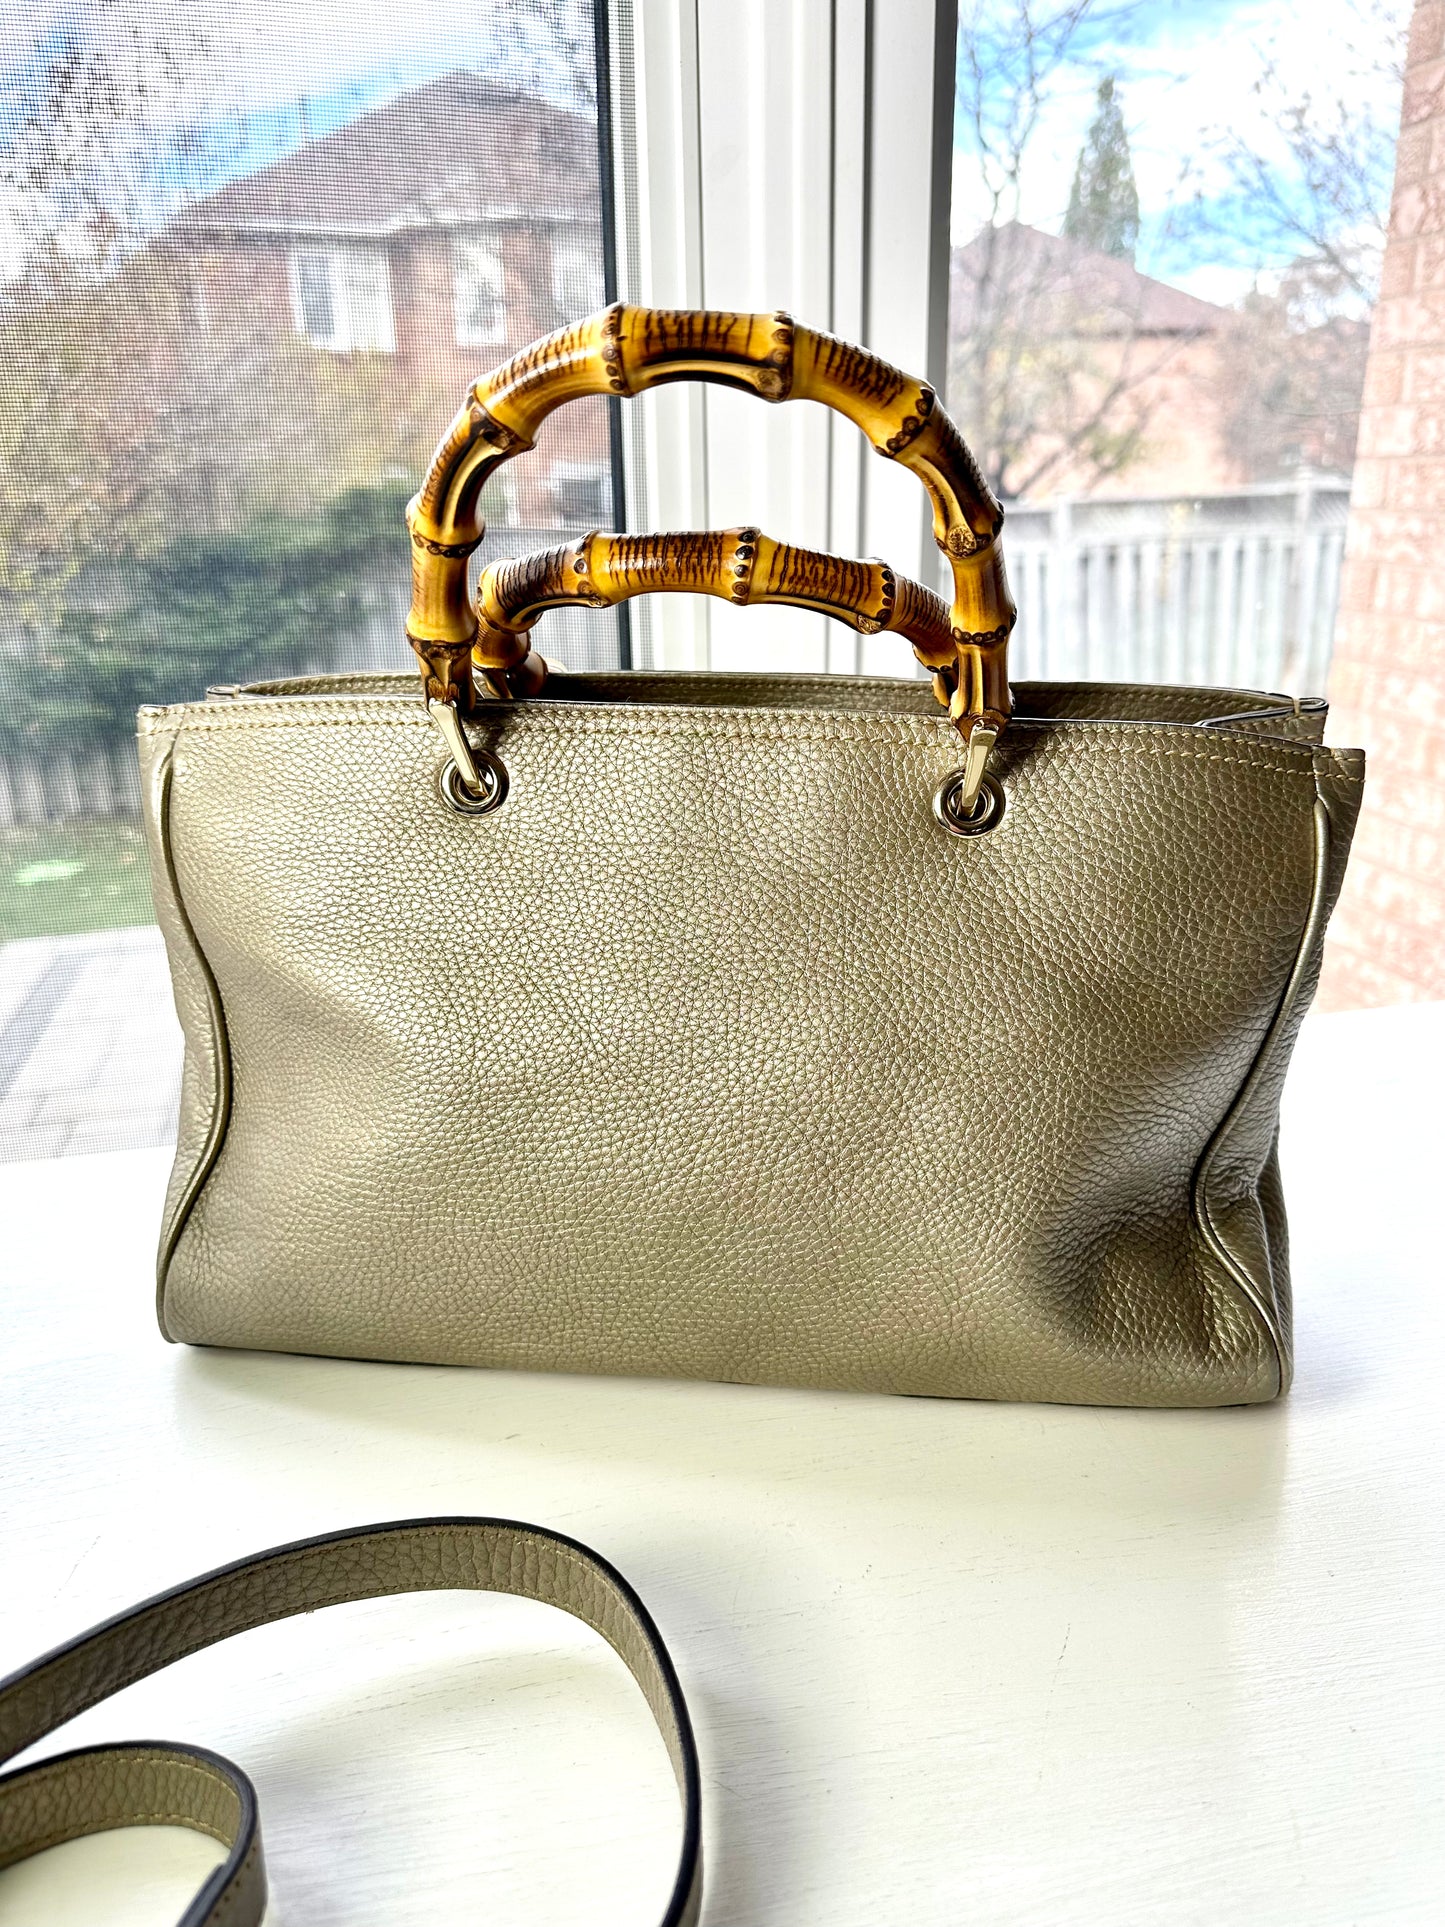 Gucci Gold Pebbled Leather Bamboo Top Handle Medium Tote Bag